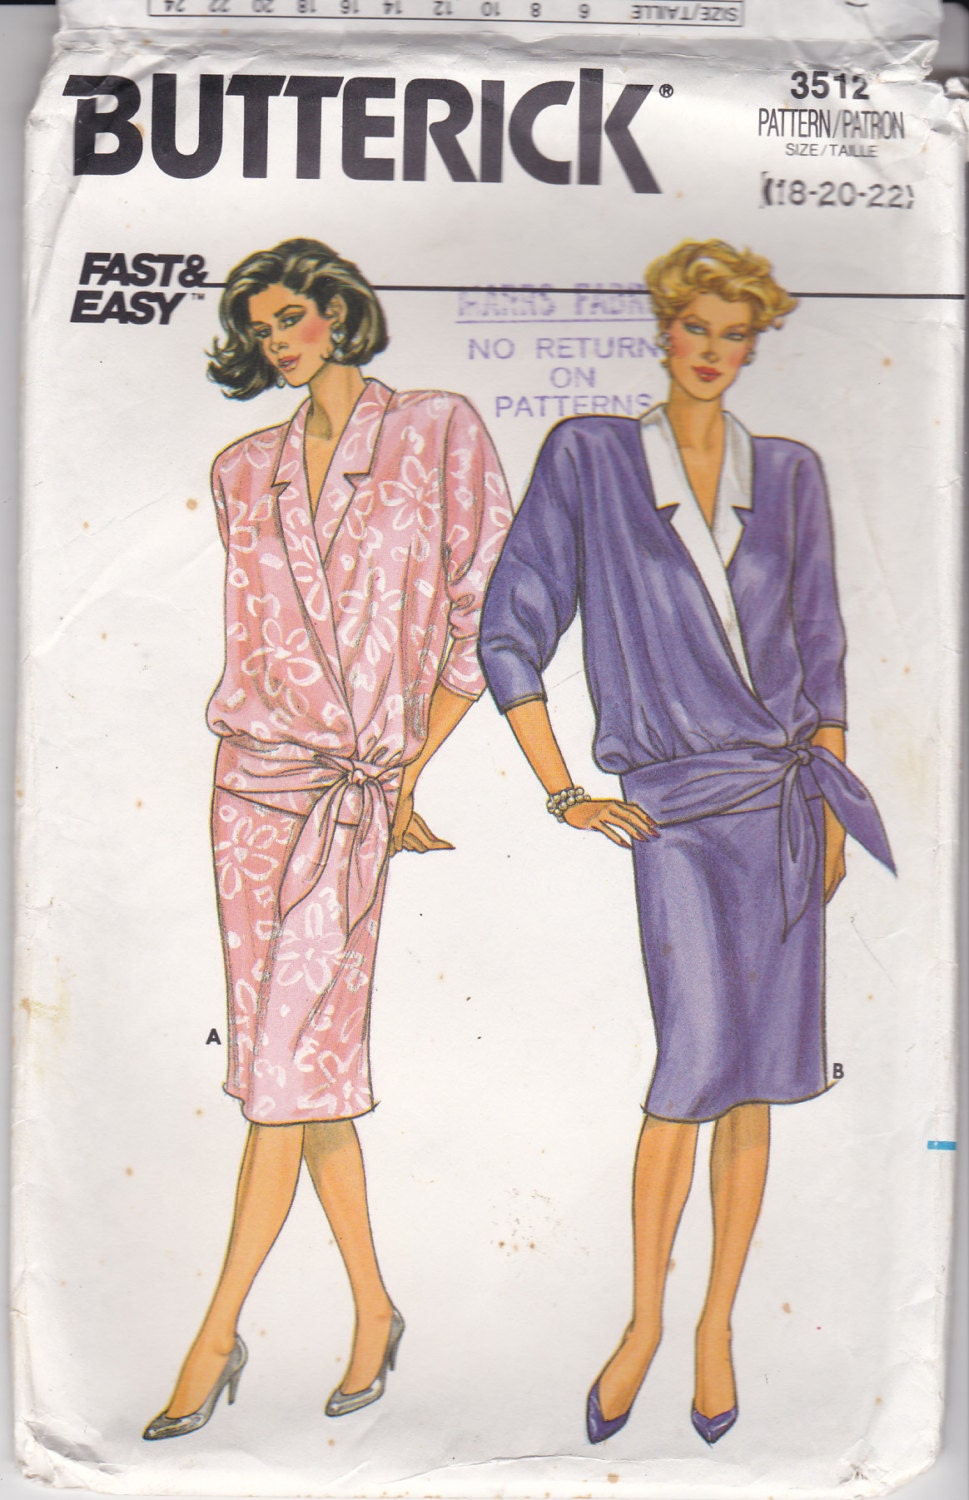 1980s Butterick Sewing Pattern No 3512 for Womens Top and